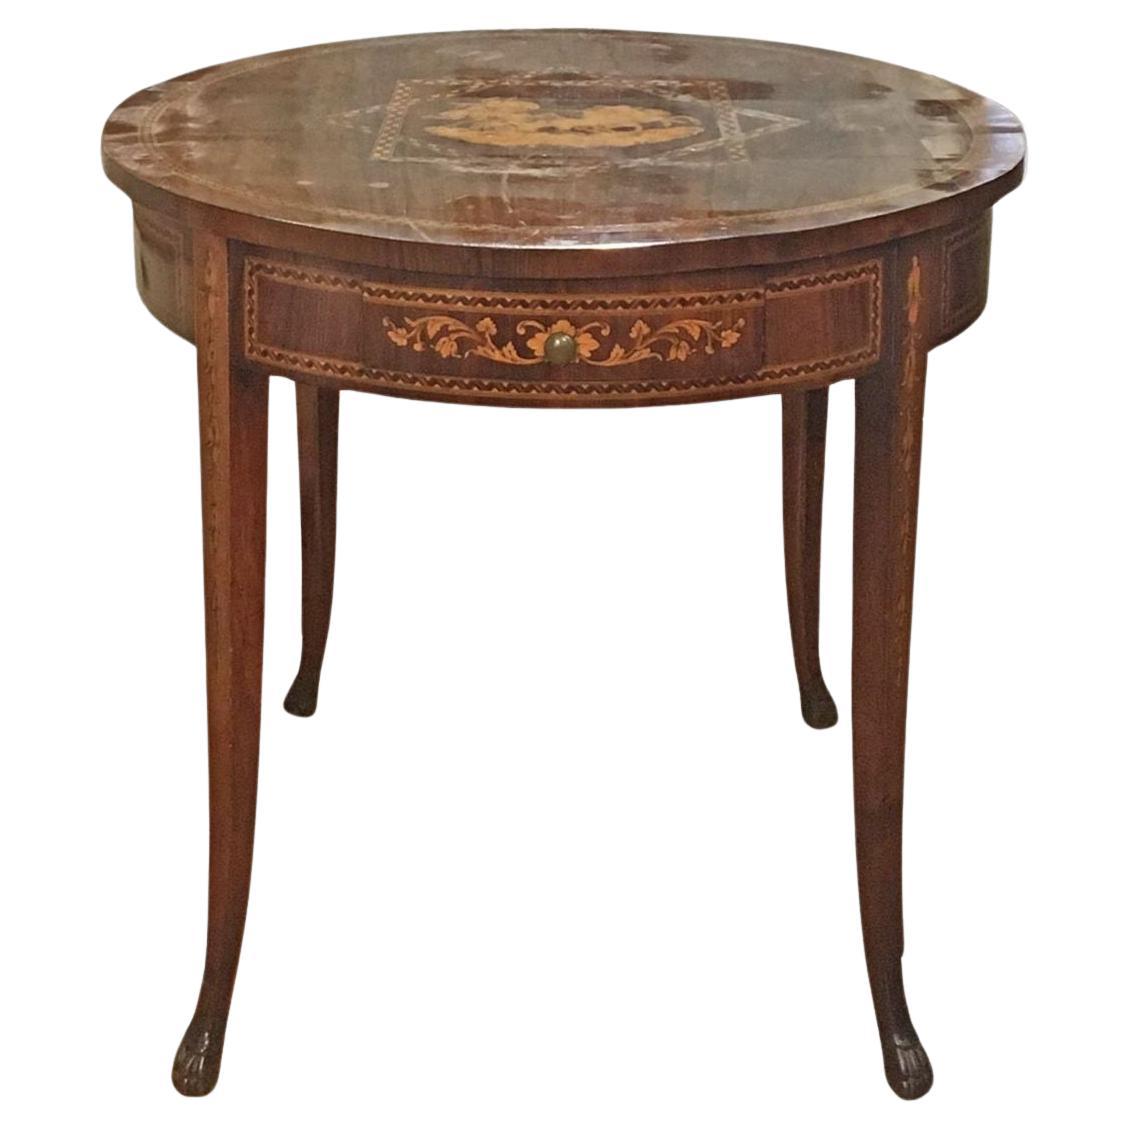 EARLY 19th CENTURY TUSCAN DIRECTORIO TABLE IN WALNUT AND FRUIT WOOD For Sale